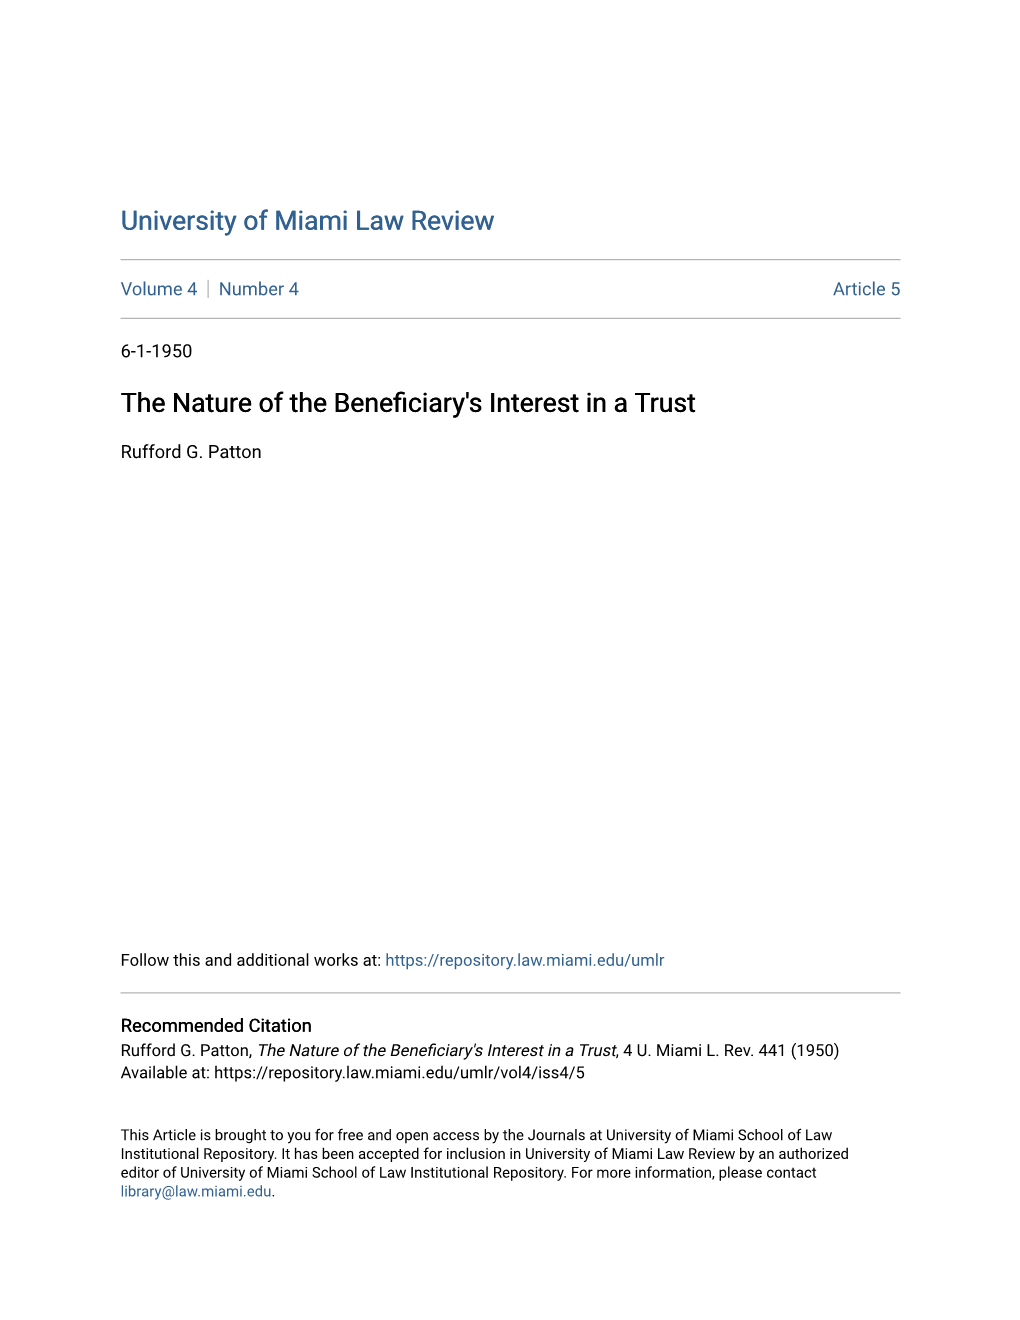 The Nature of the Beneficiary's Interest in a Trust